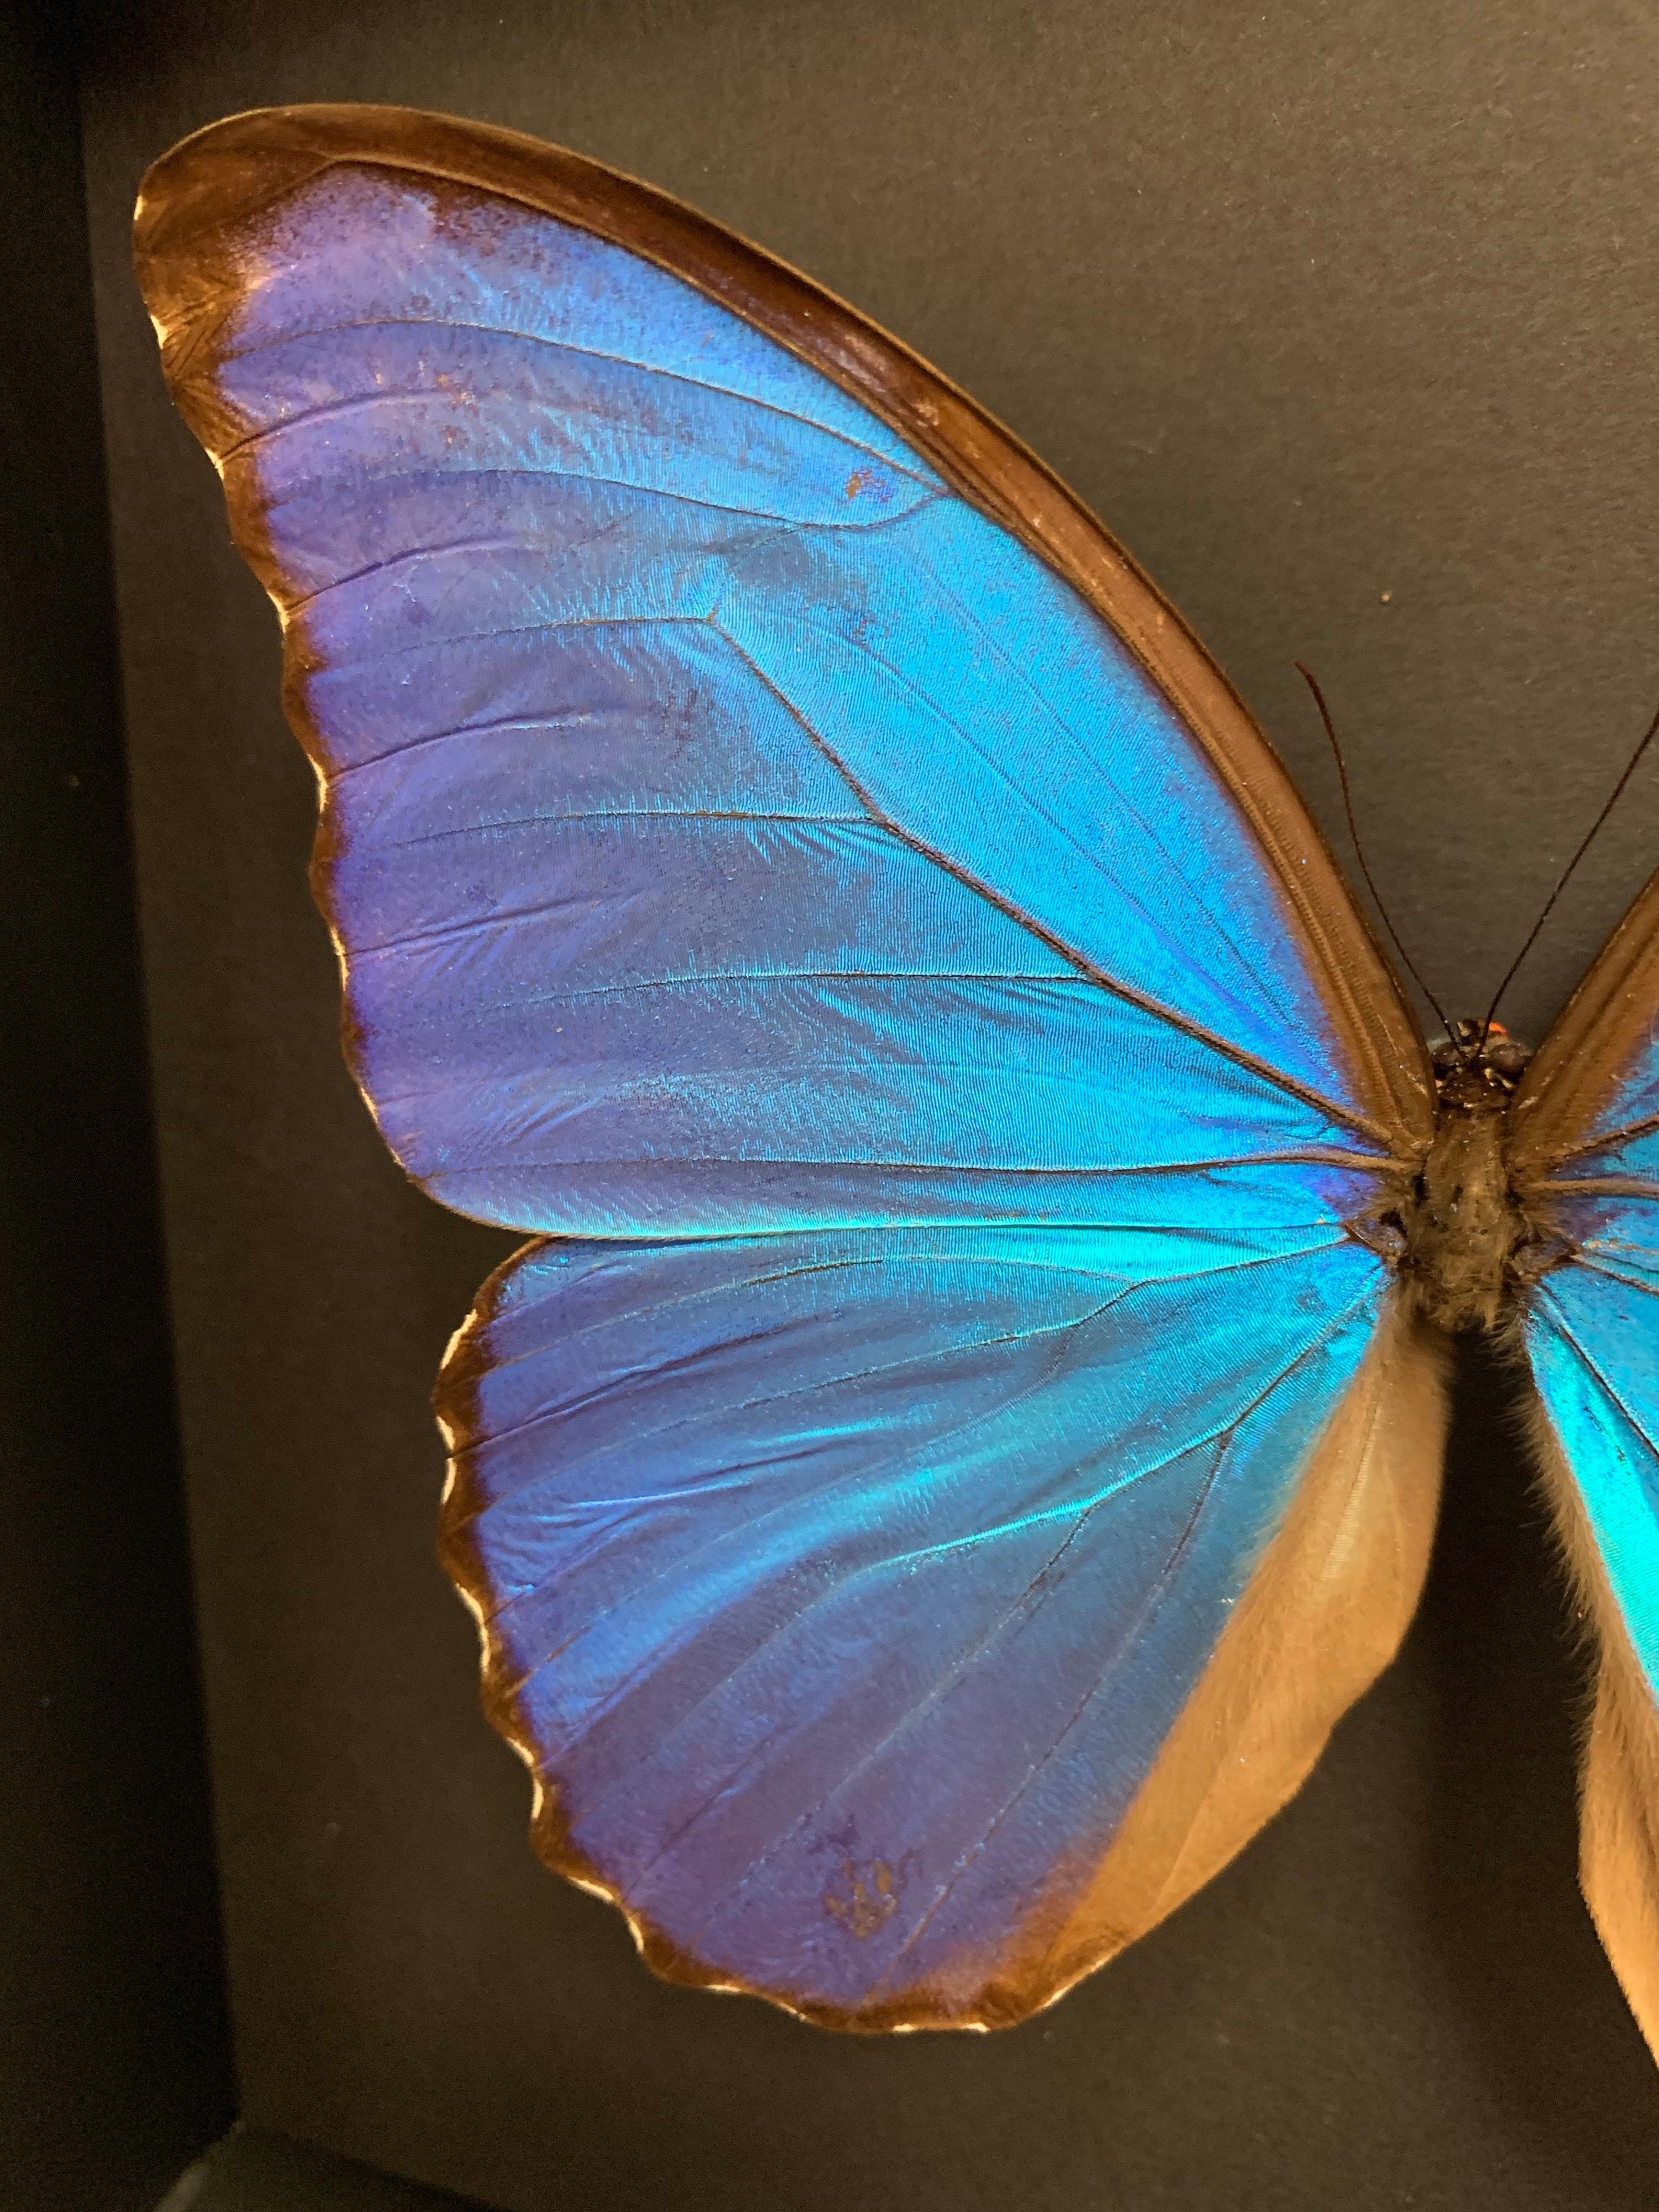 Thai Taxidermy Giant Morpho Butterfly in Glass Wood Case